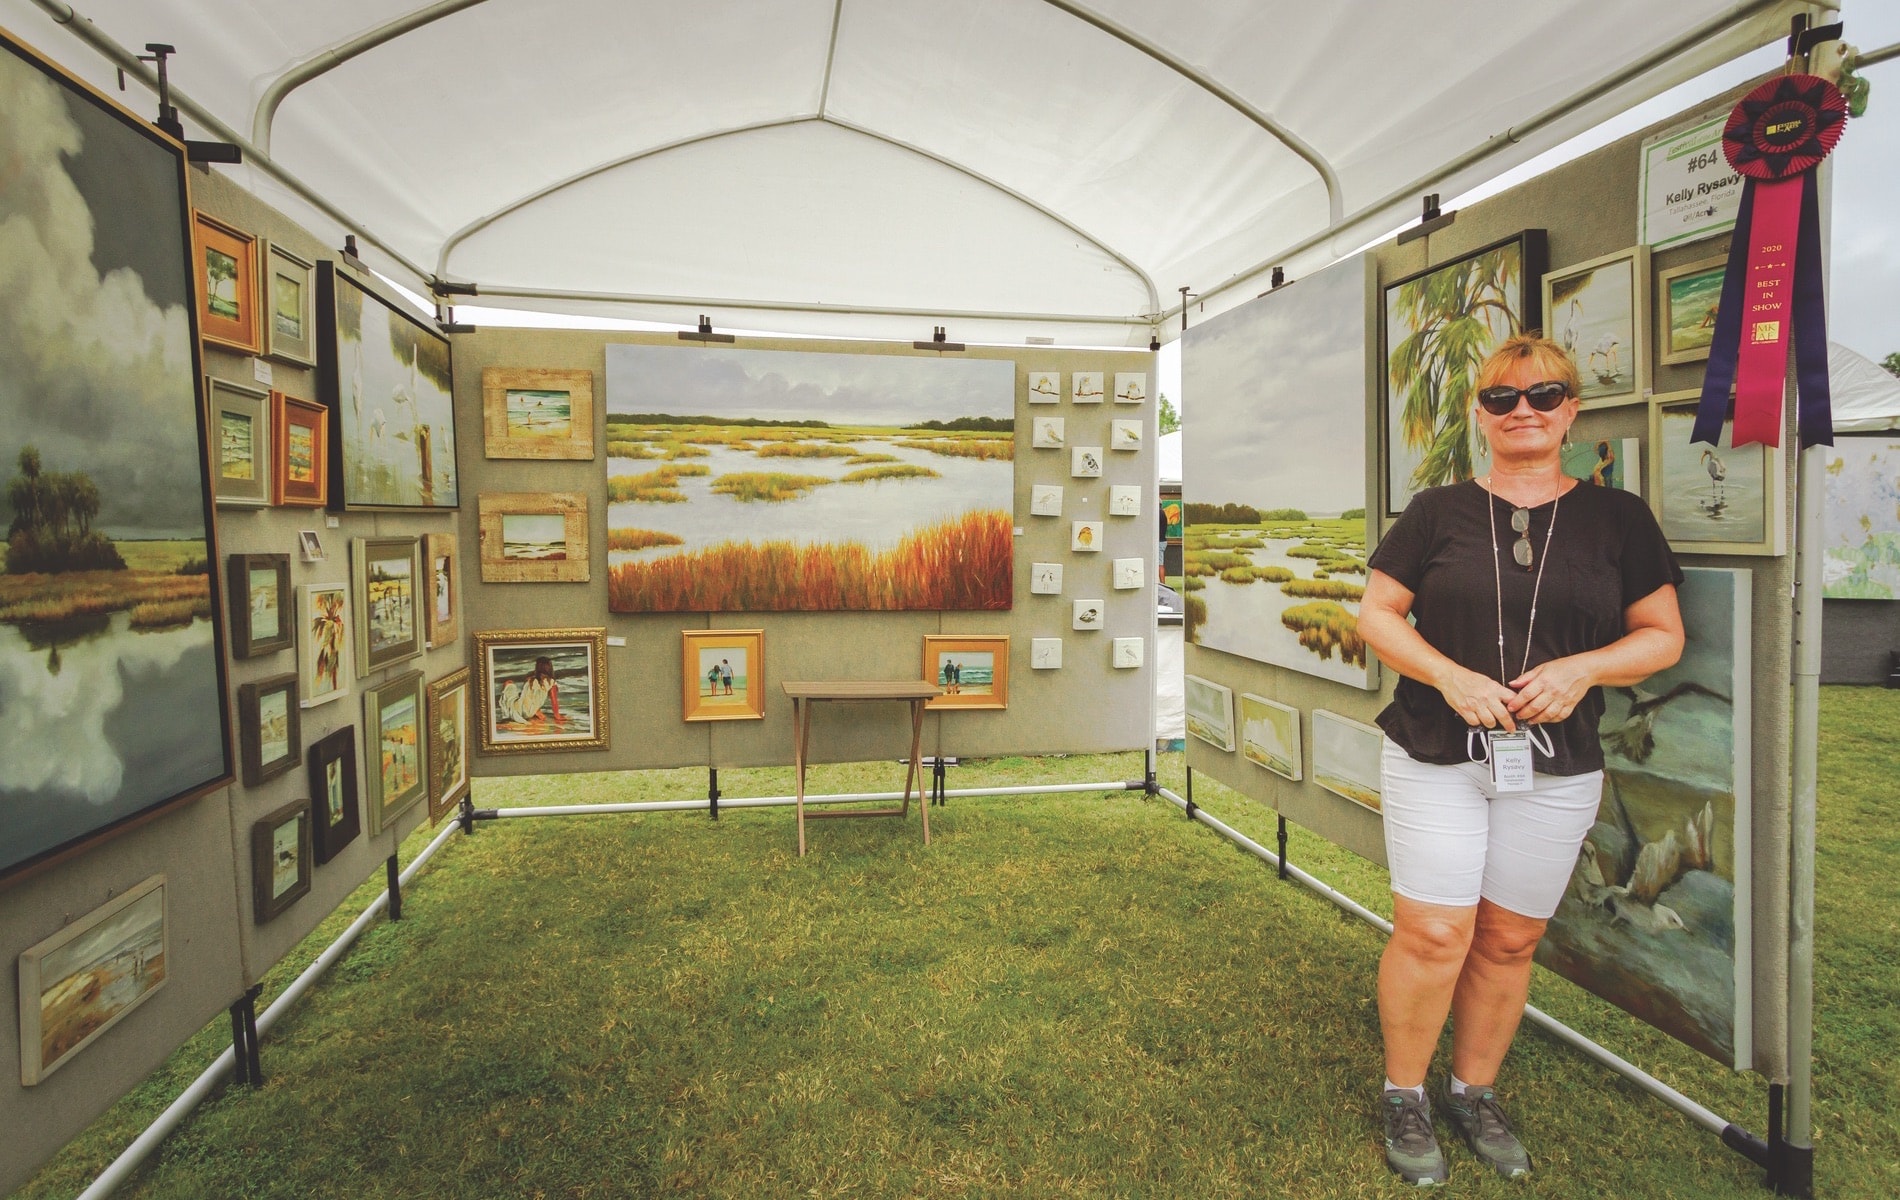 25th Annual Festival of the Arts Presented by Mattie Kelly Arts Foundation